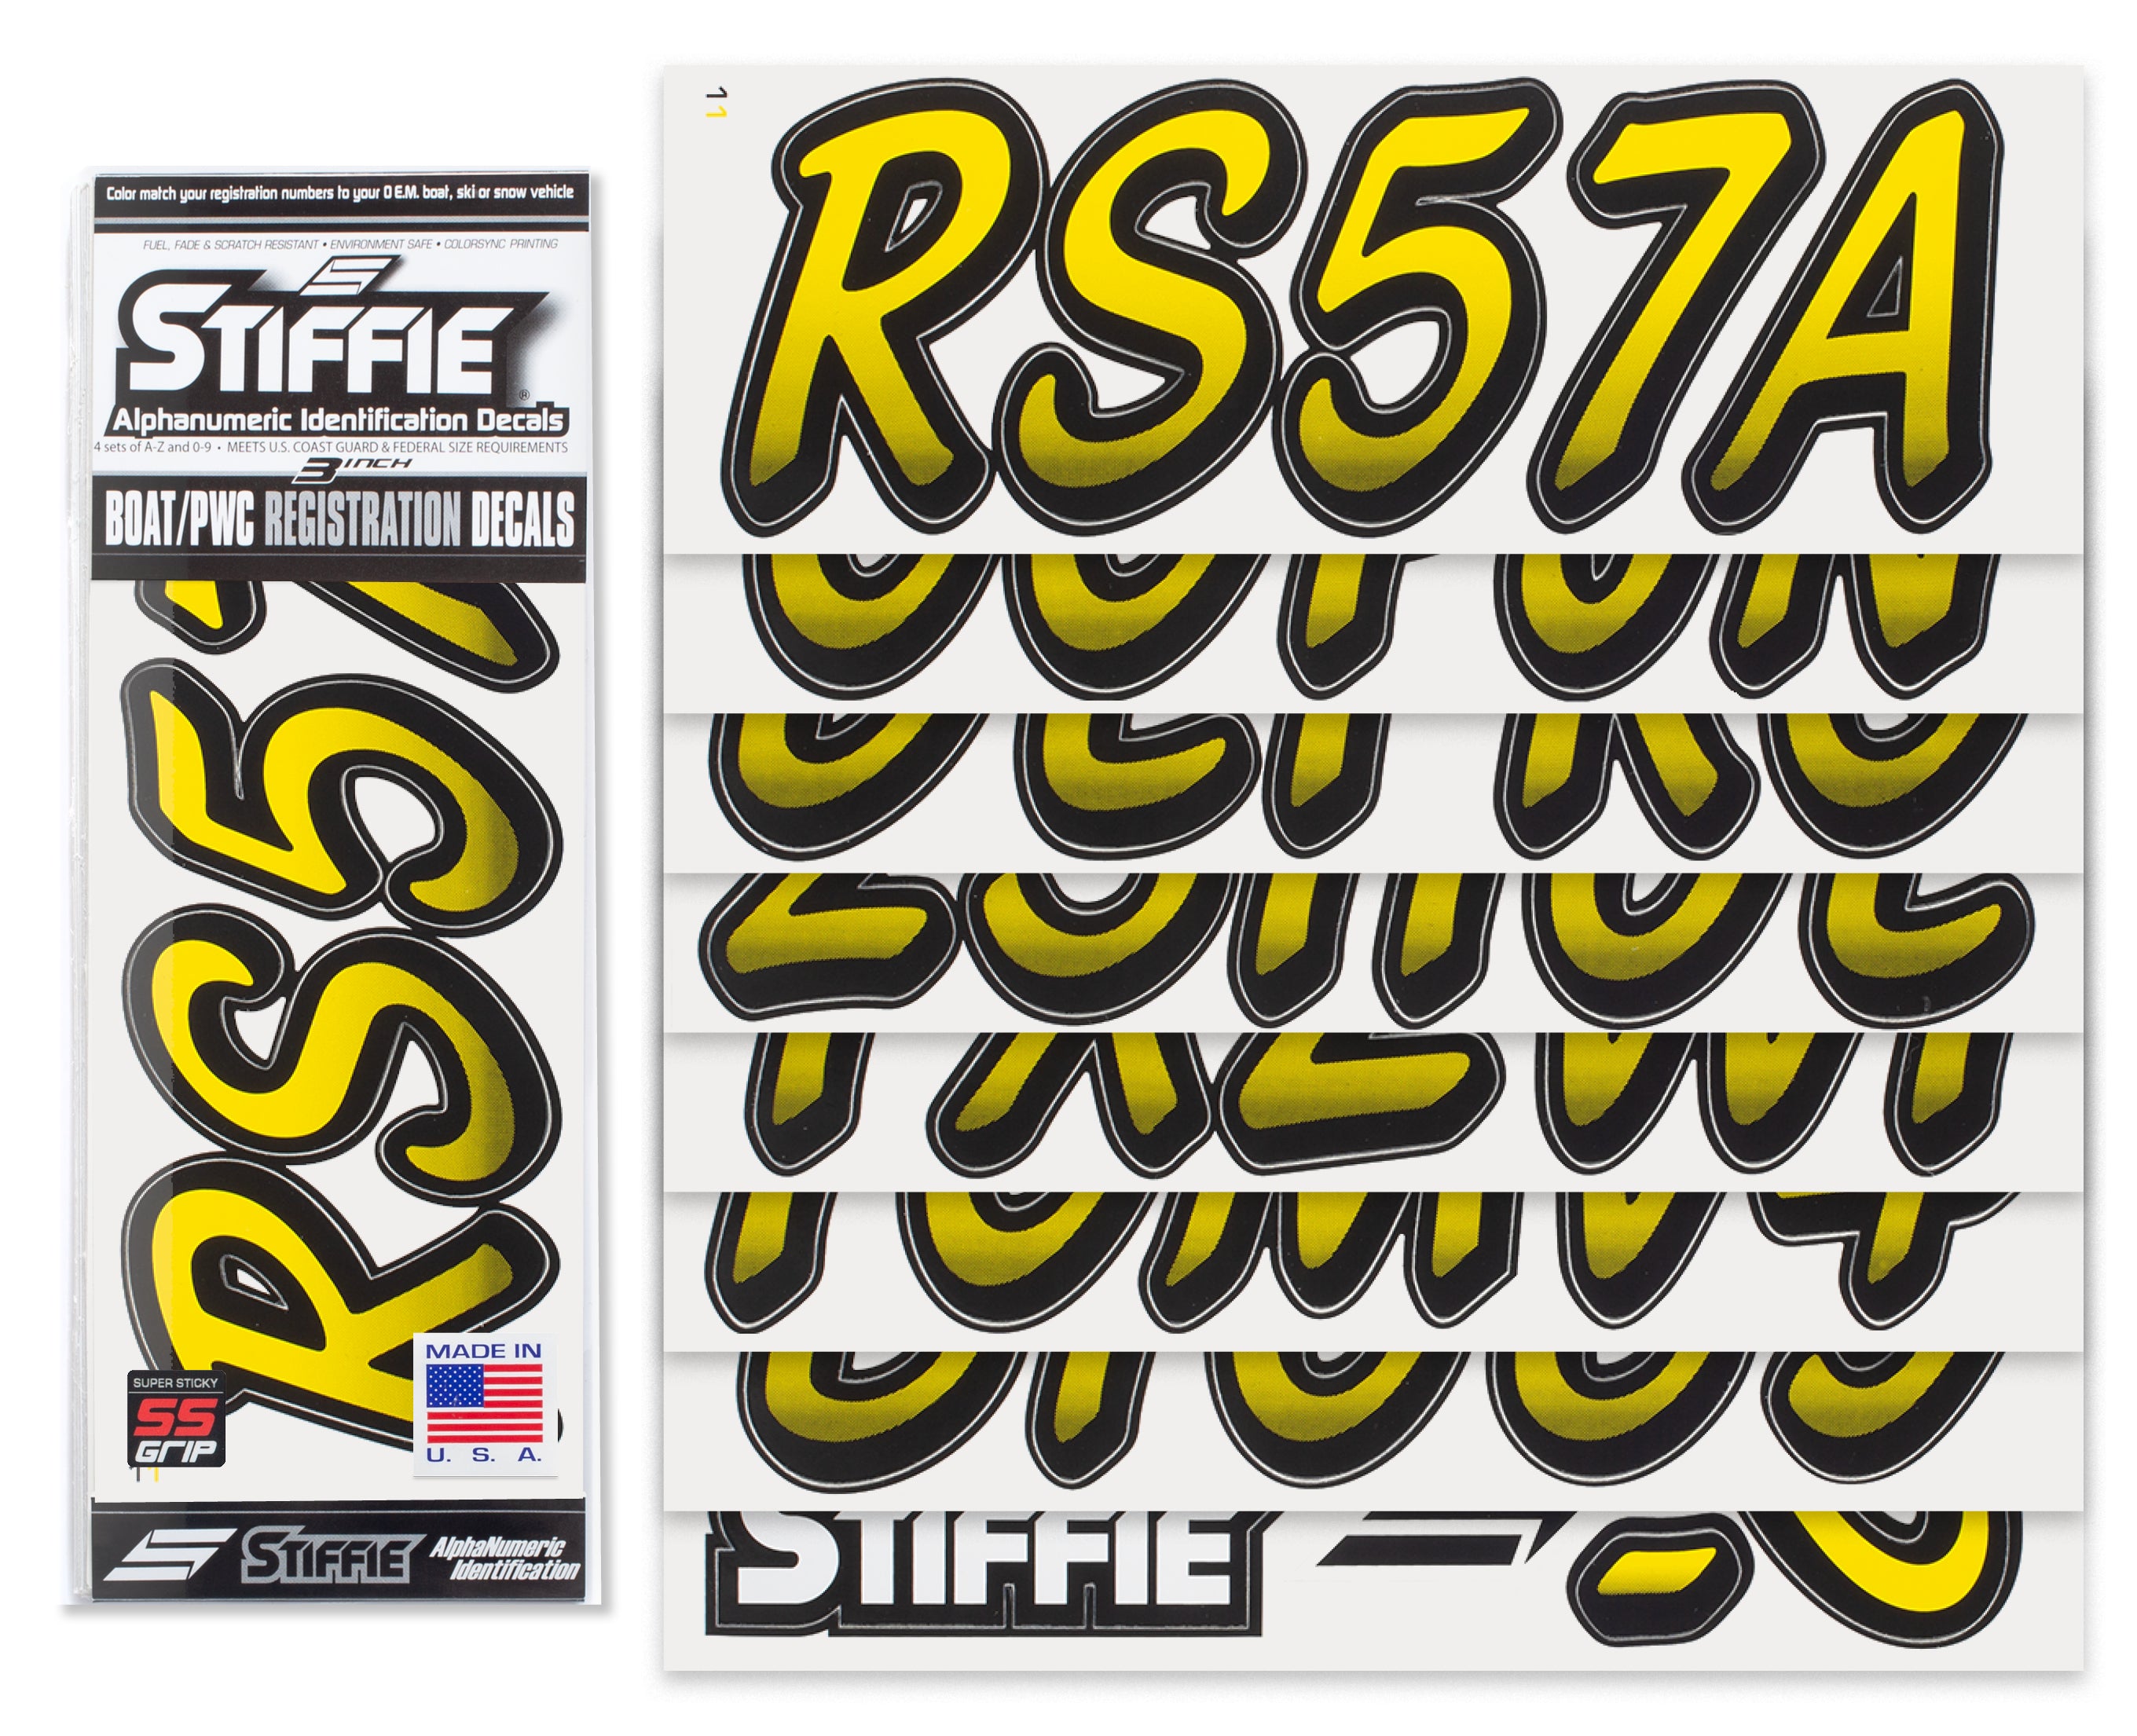 Stiffie Whipline Yellow Crush/Black Super Sticky 3" Alpha Numeric Registration Identification Numbers Stickers Decals for Sea-Doo Spark, Inflatable Boats, Ribs, Hypalon/PVC, PWC and Boats.